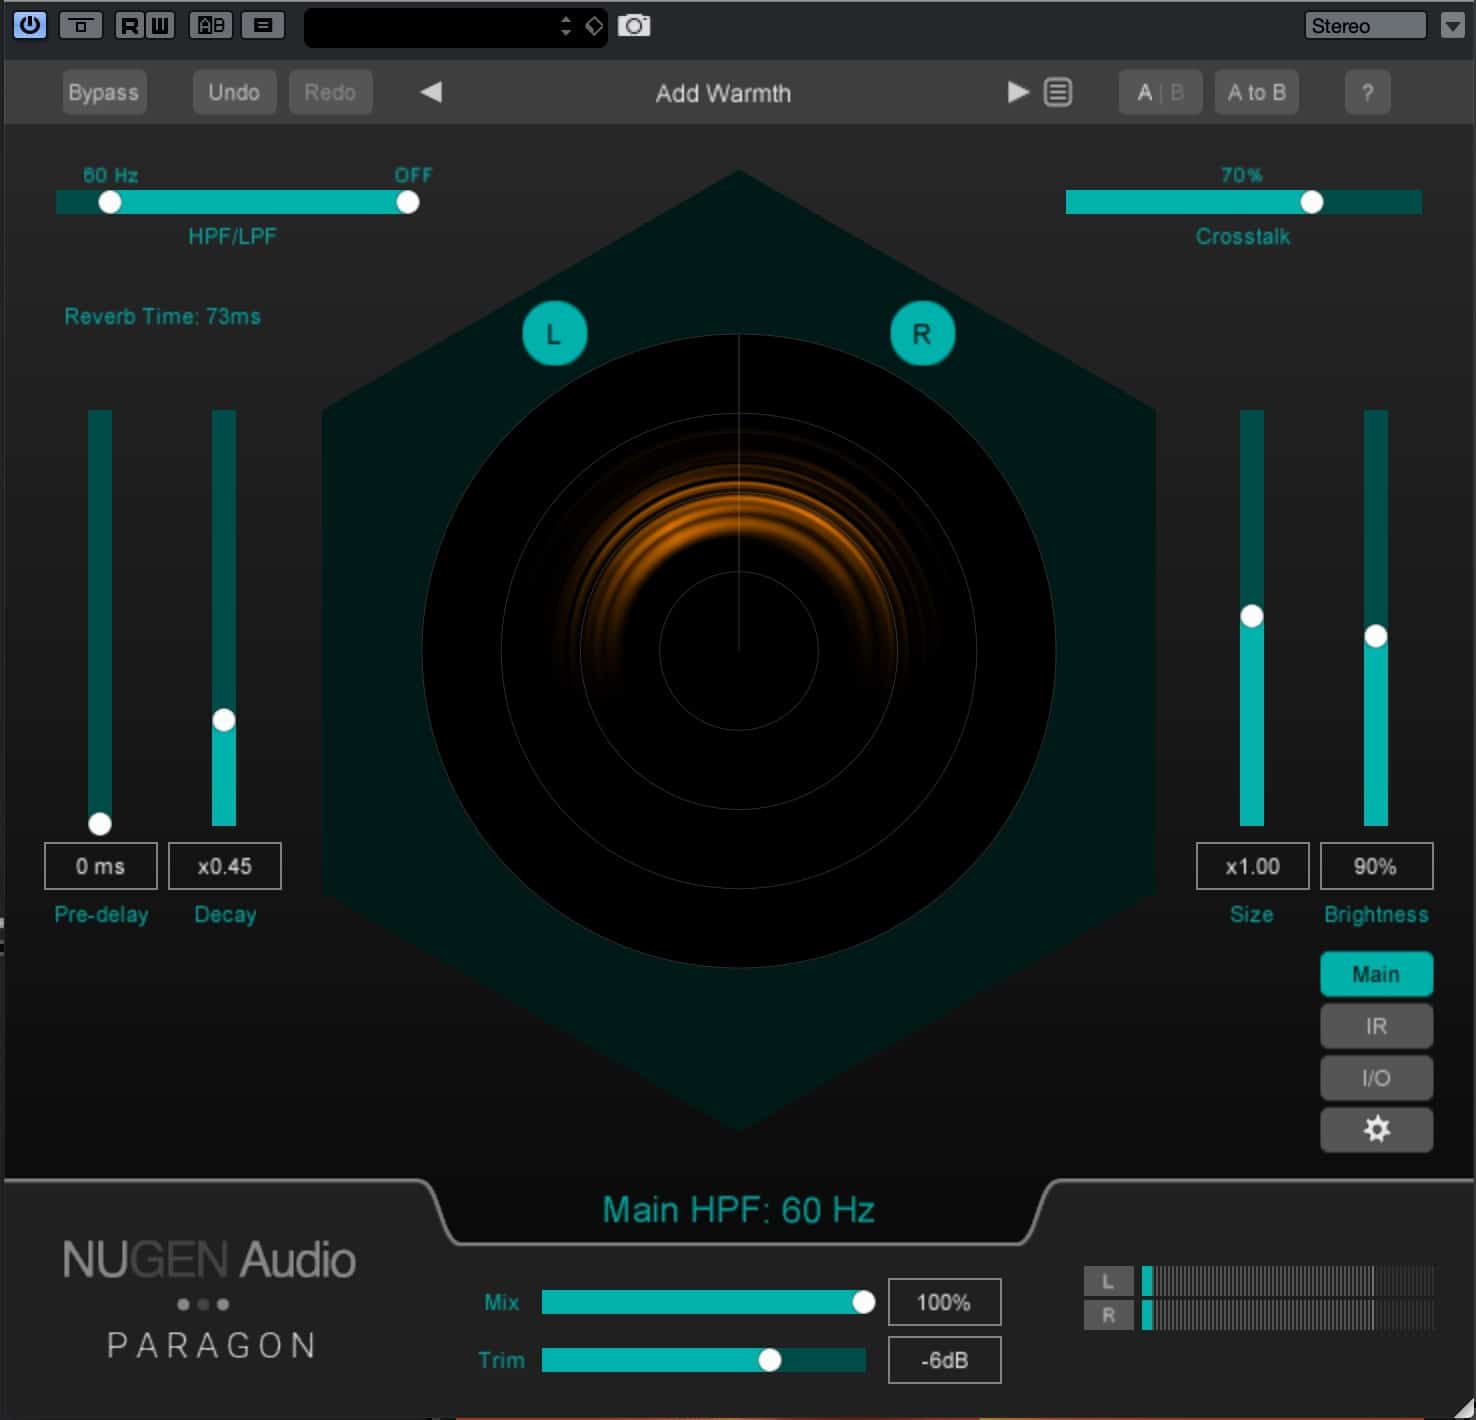 Introducing Paragon – Meet The Latest In Reverb Technology By Nugen Audio